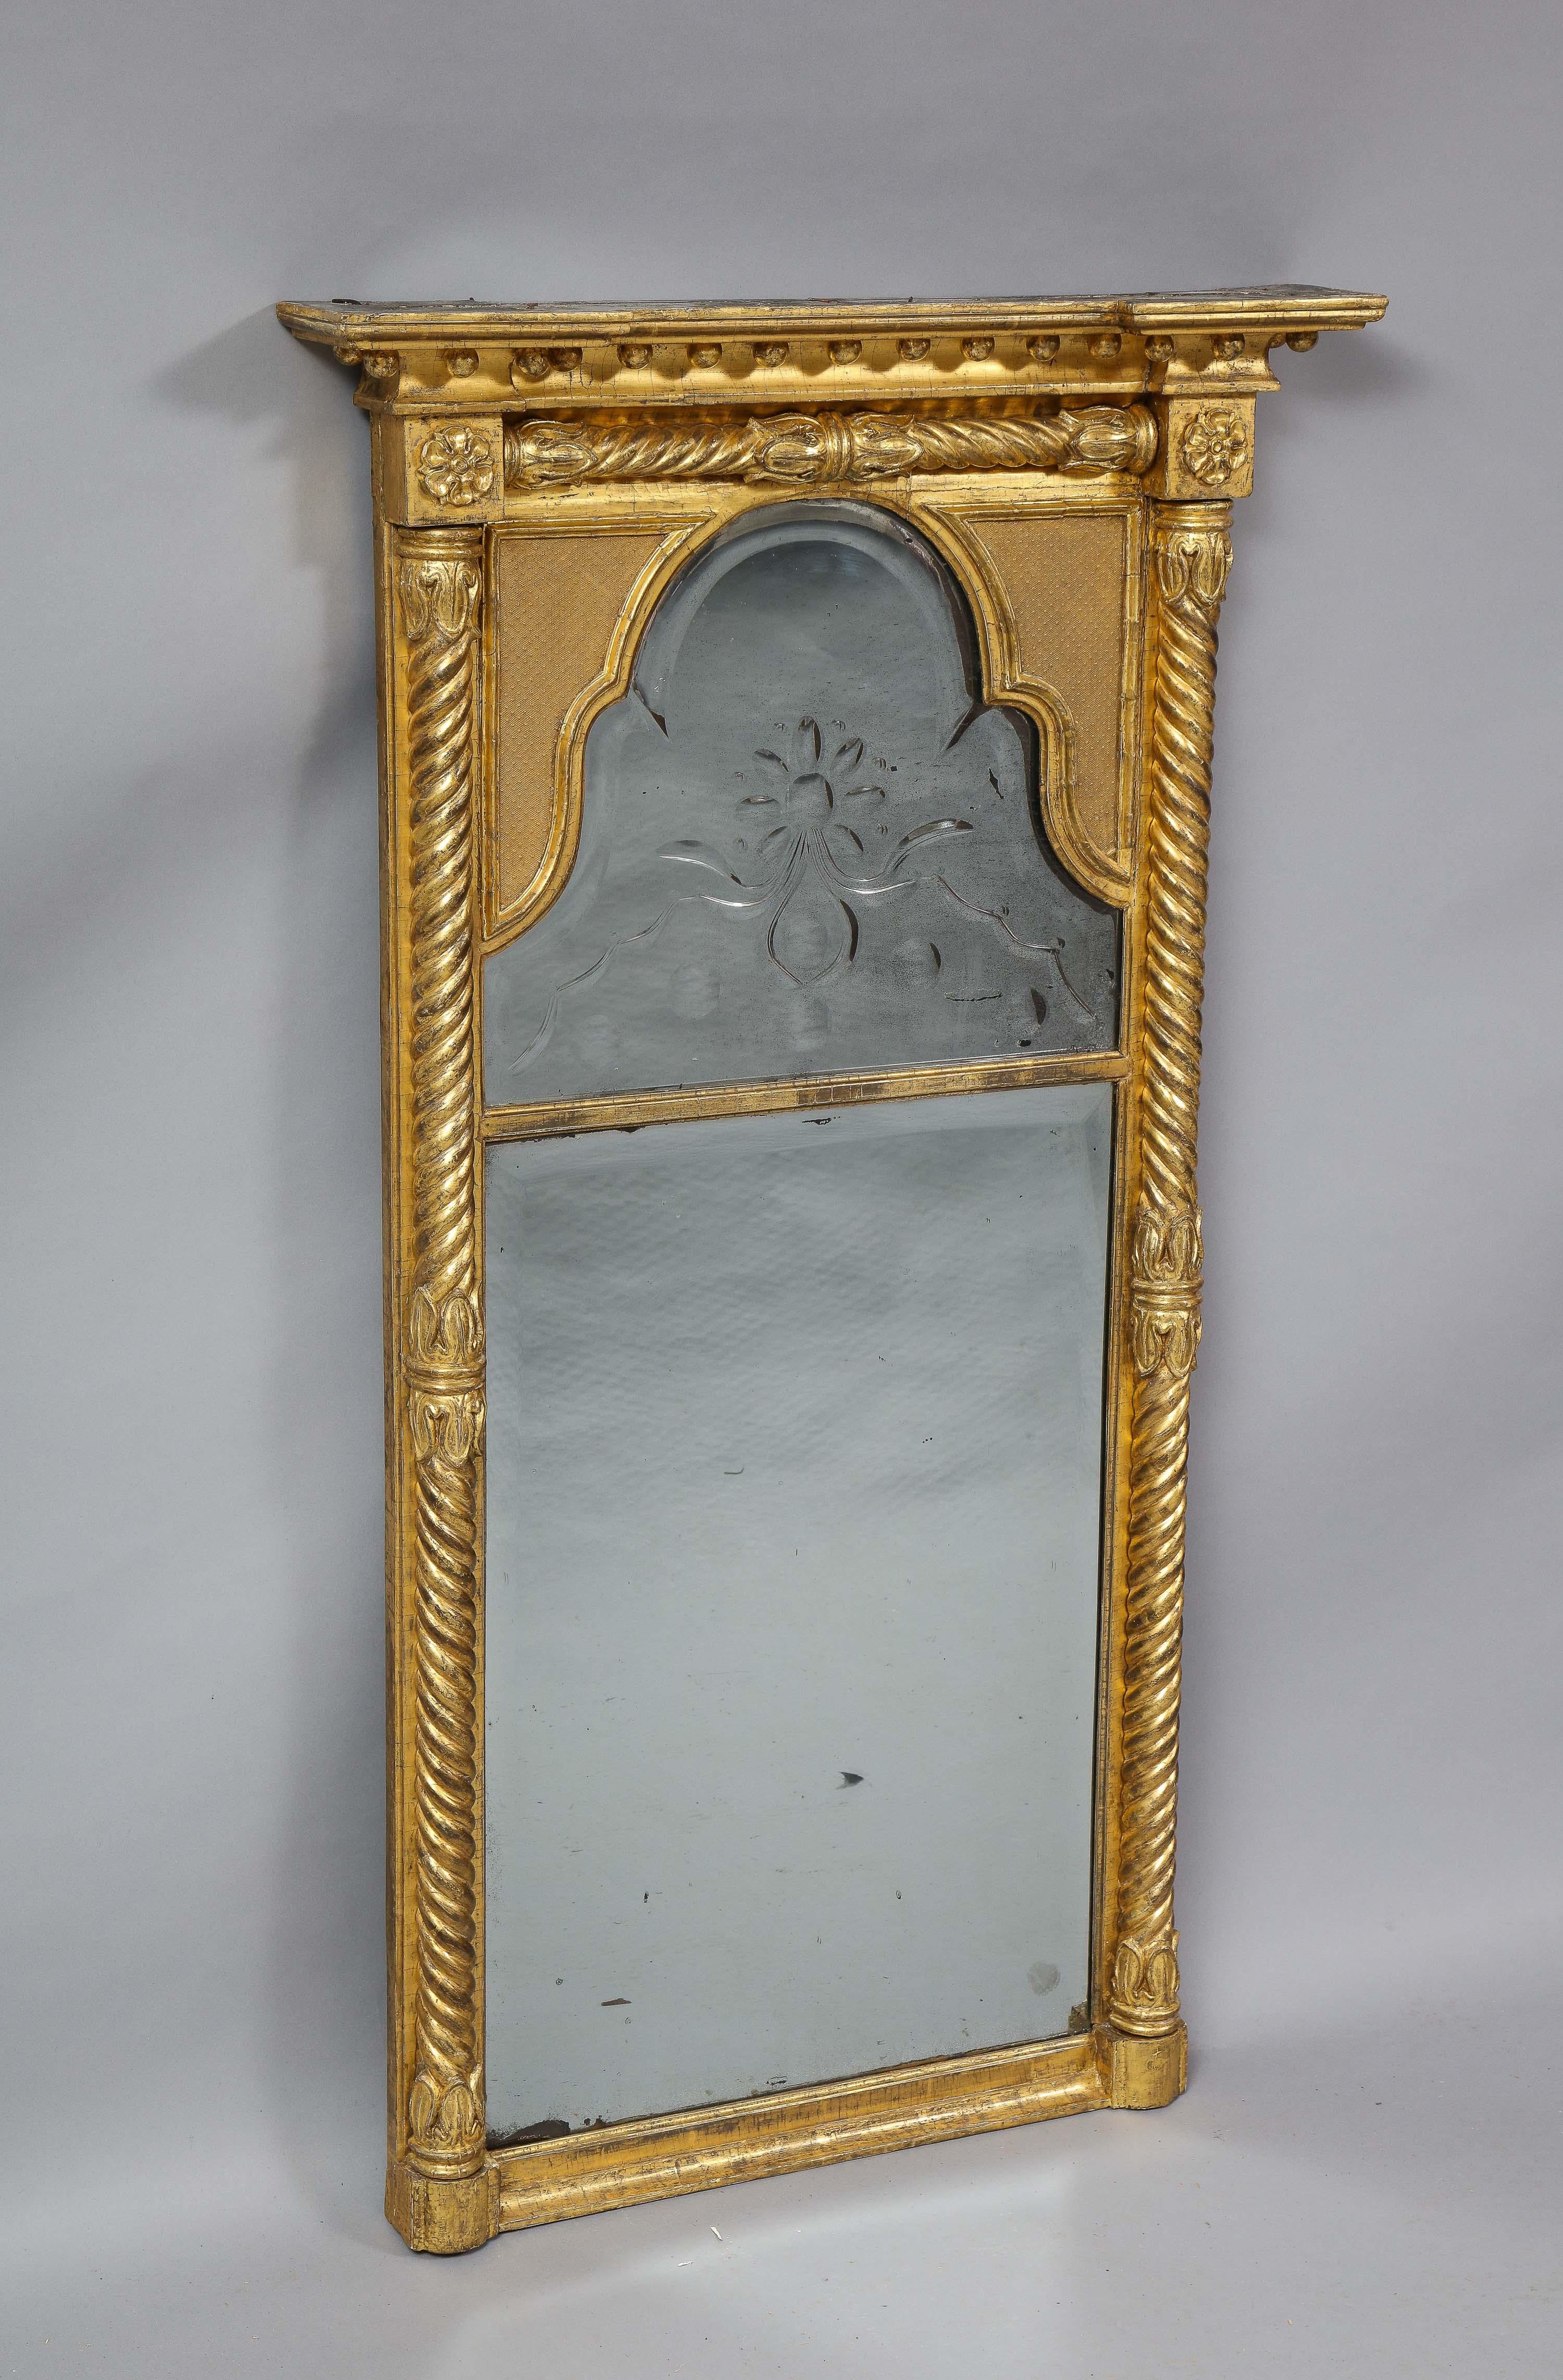 Most unusual early 19th century giltwood pier mirror, the crest with a row of suspended gilt balls, over an arched, etched and hollow beveled Vauxhall mercury glass upper and lower plate, surmounted with spiraled gilt columns, the whole retaining